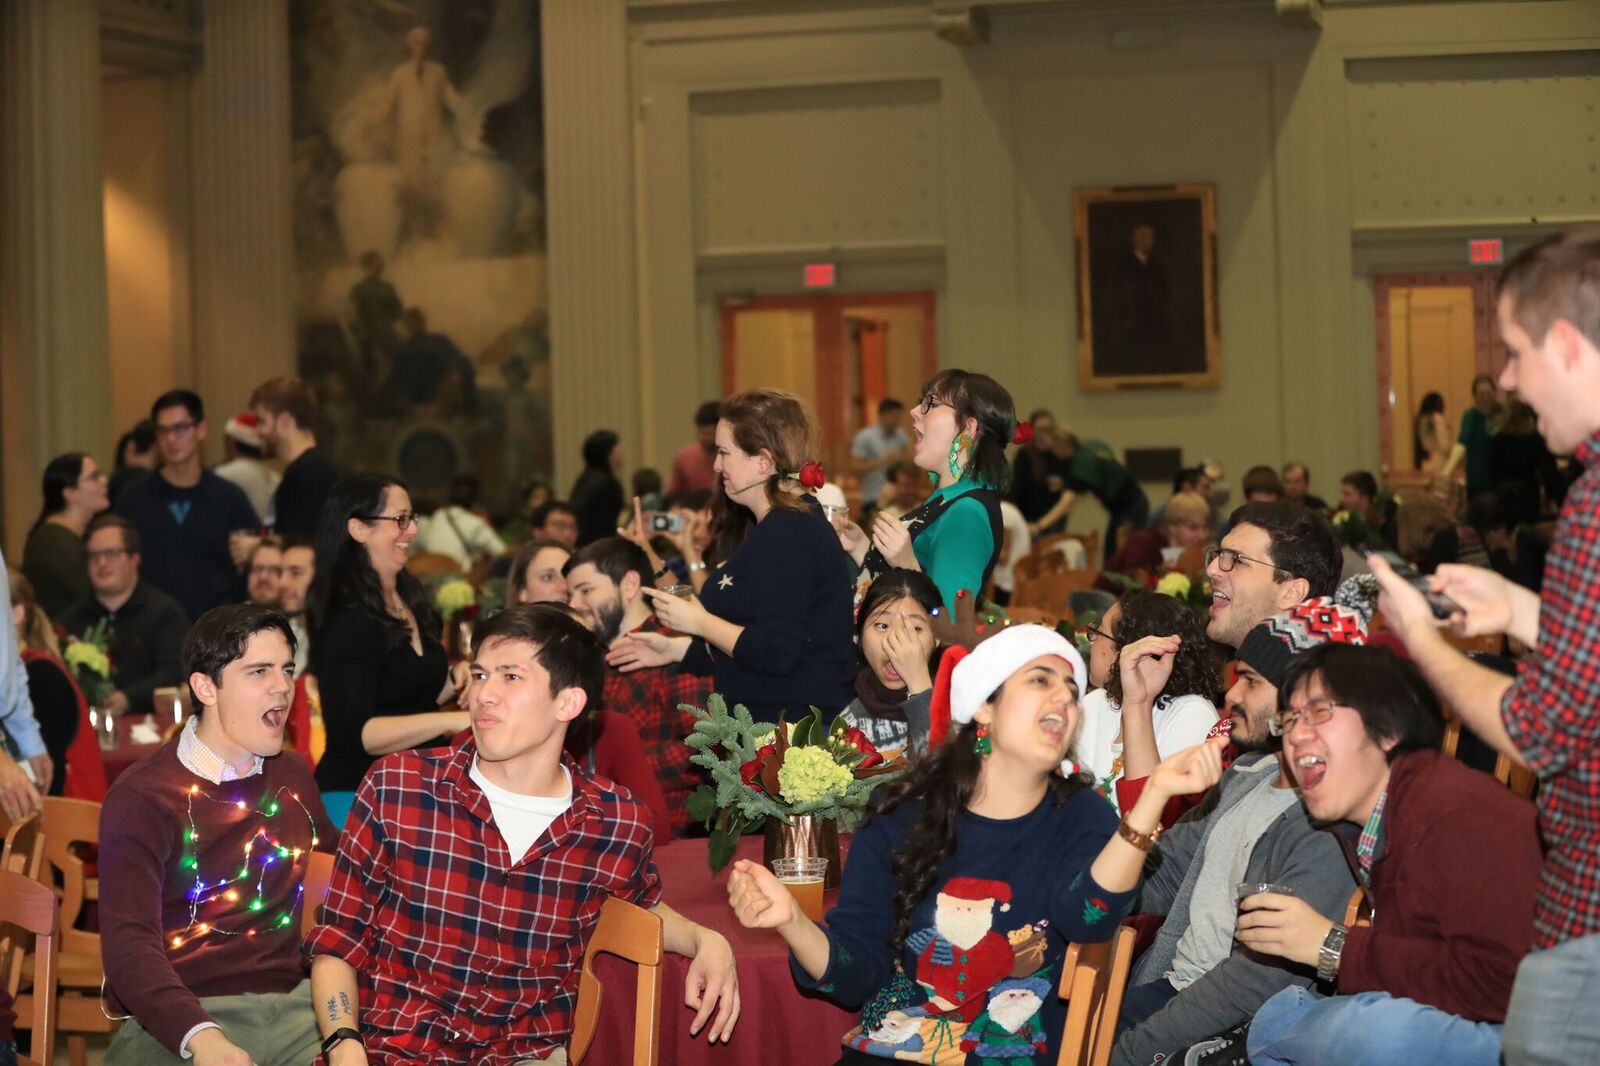 Members of the department of chemistry enjoy karaoke in a large ballroom while wearing festive holiday sweaters